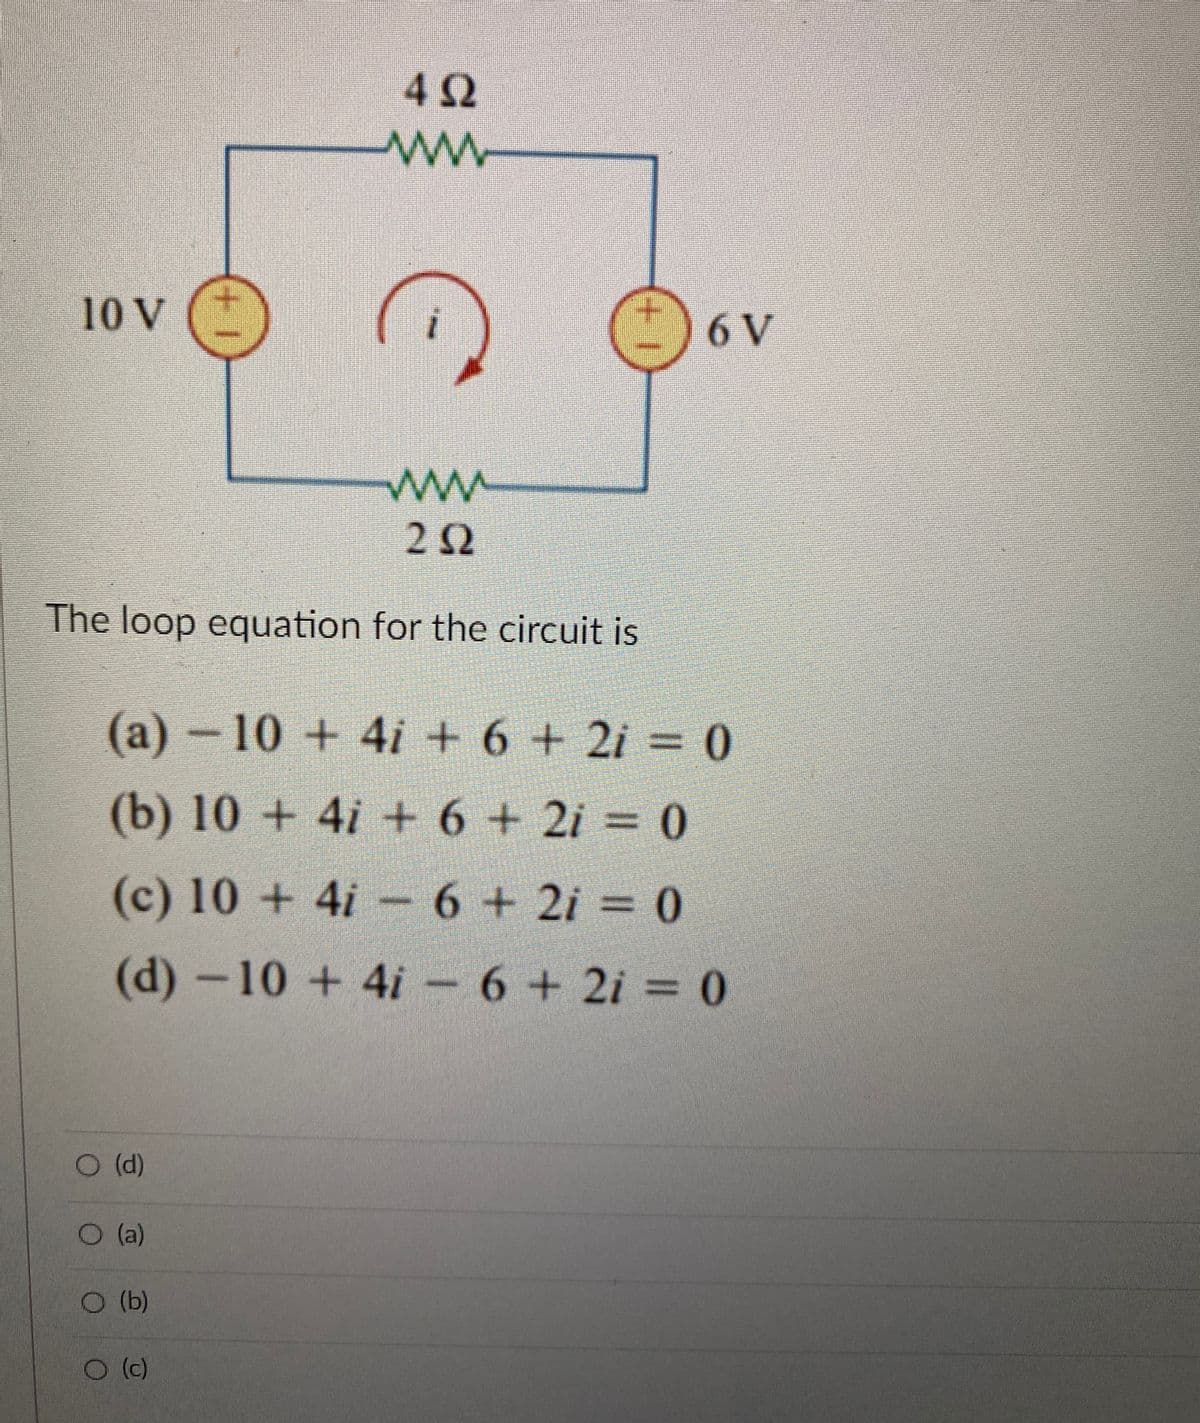 10 V
O (d)
O (a)
+
www
252
The loop equation for the circuit is
O (b)
402
www
O (c)
i
(a)-10 + 4i + 6 + 2i = 0
(b) 10 + 4i + 6 + 2i = 0
(c) 10+4i-6+2i = 0
(d) -10 + 4i - 6+2i = 0
1+
6 V